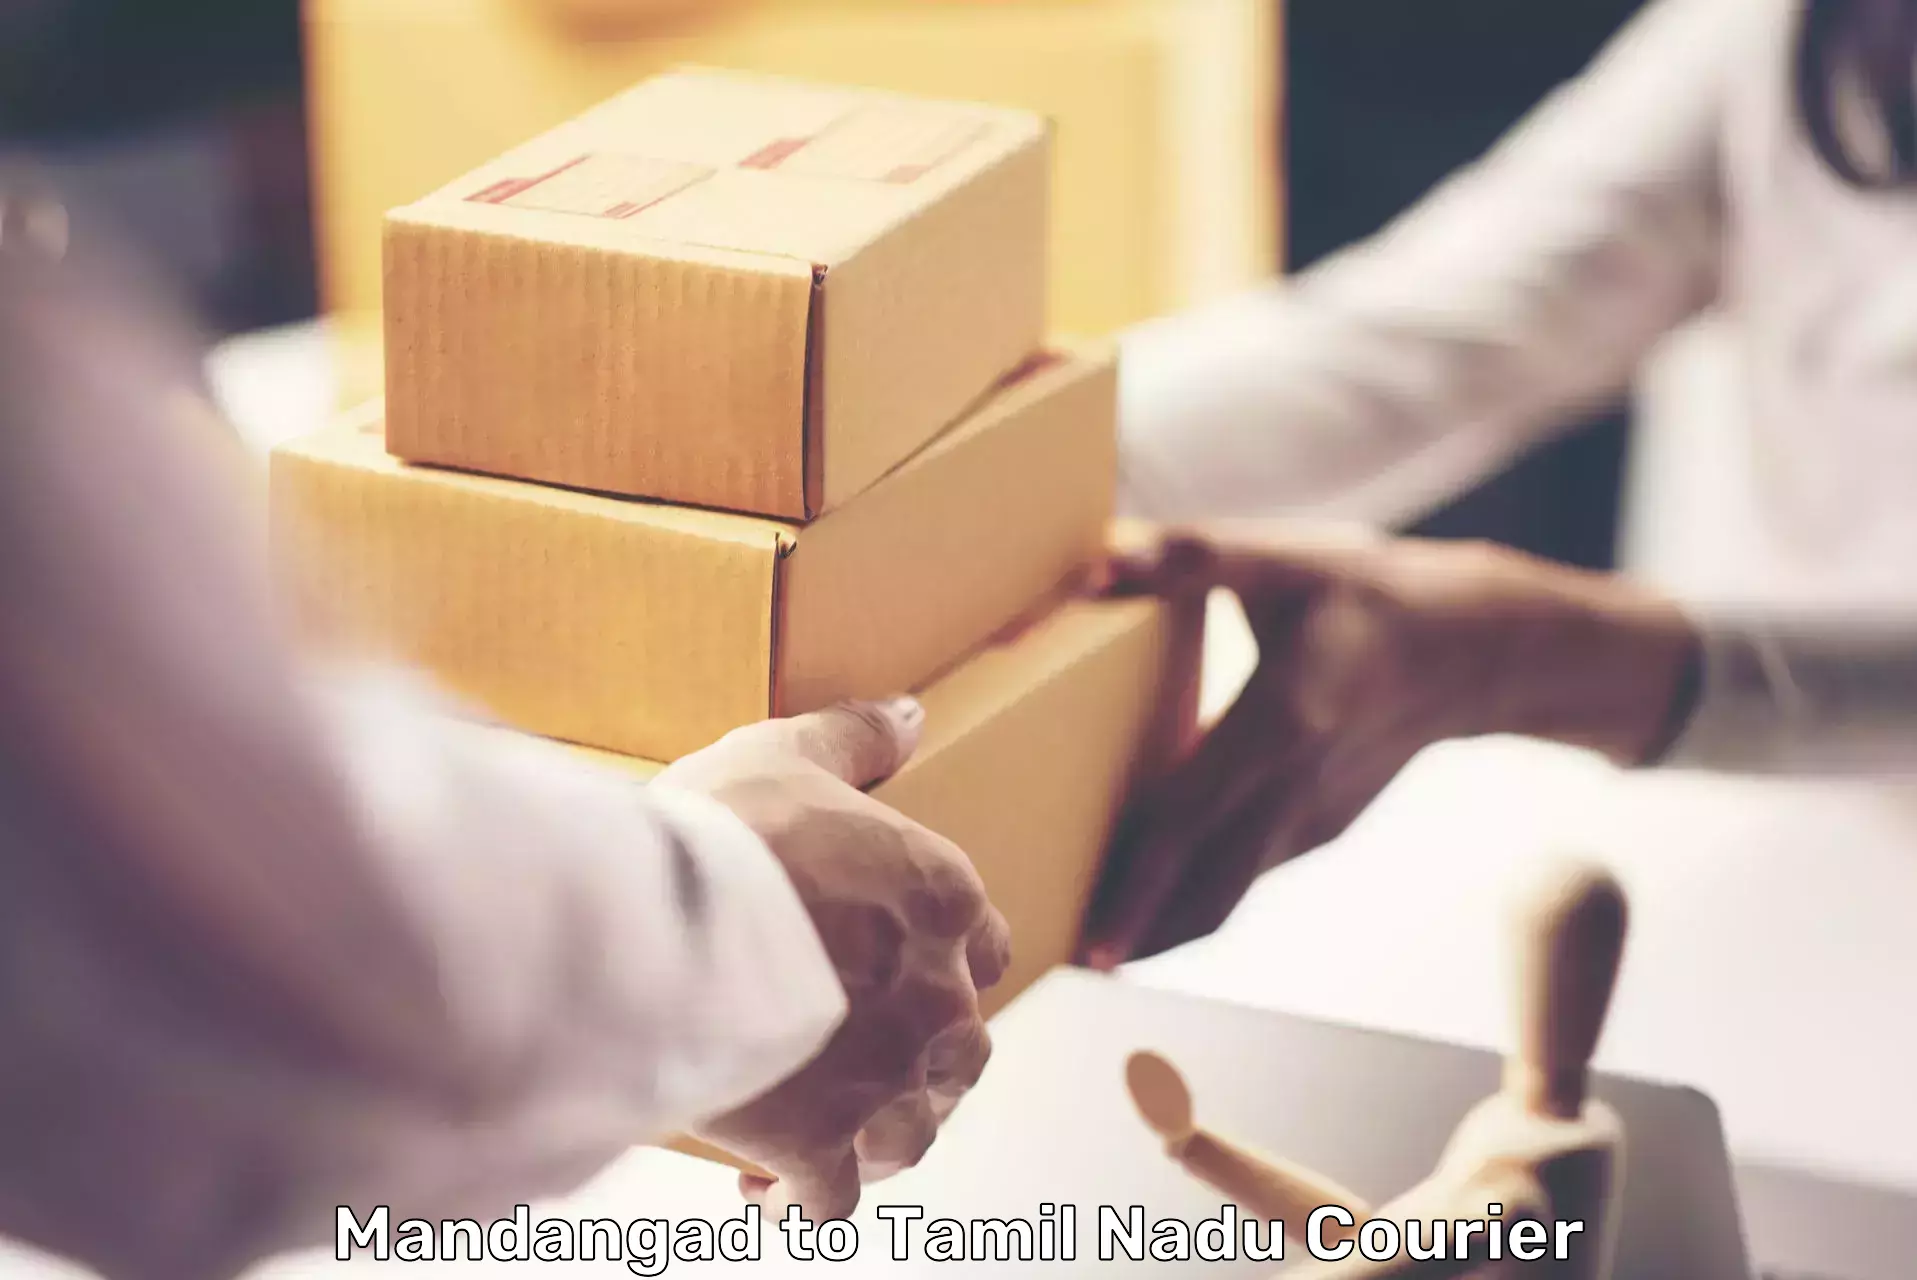 Package delivery network Mandangad to Thiruvarur